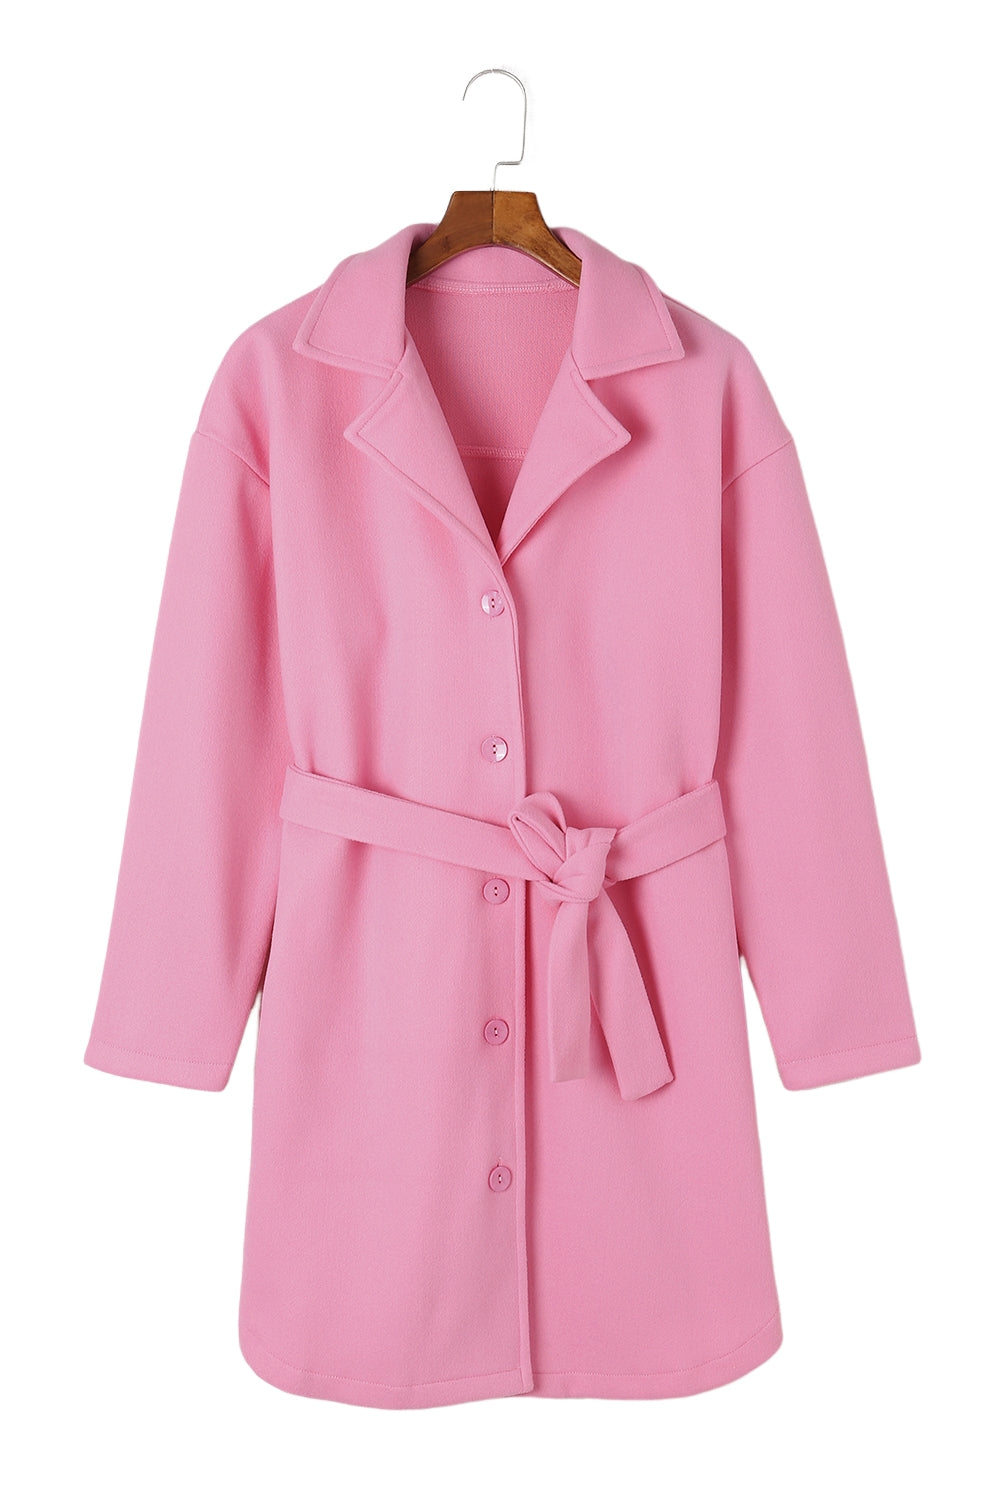 Pink Solid Color Buttoned Coat with Tie